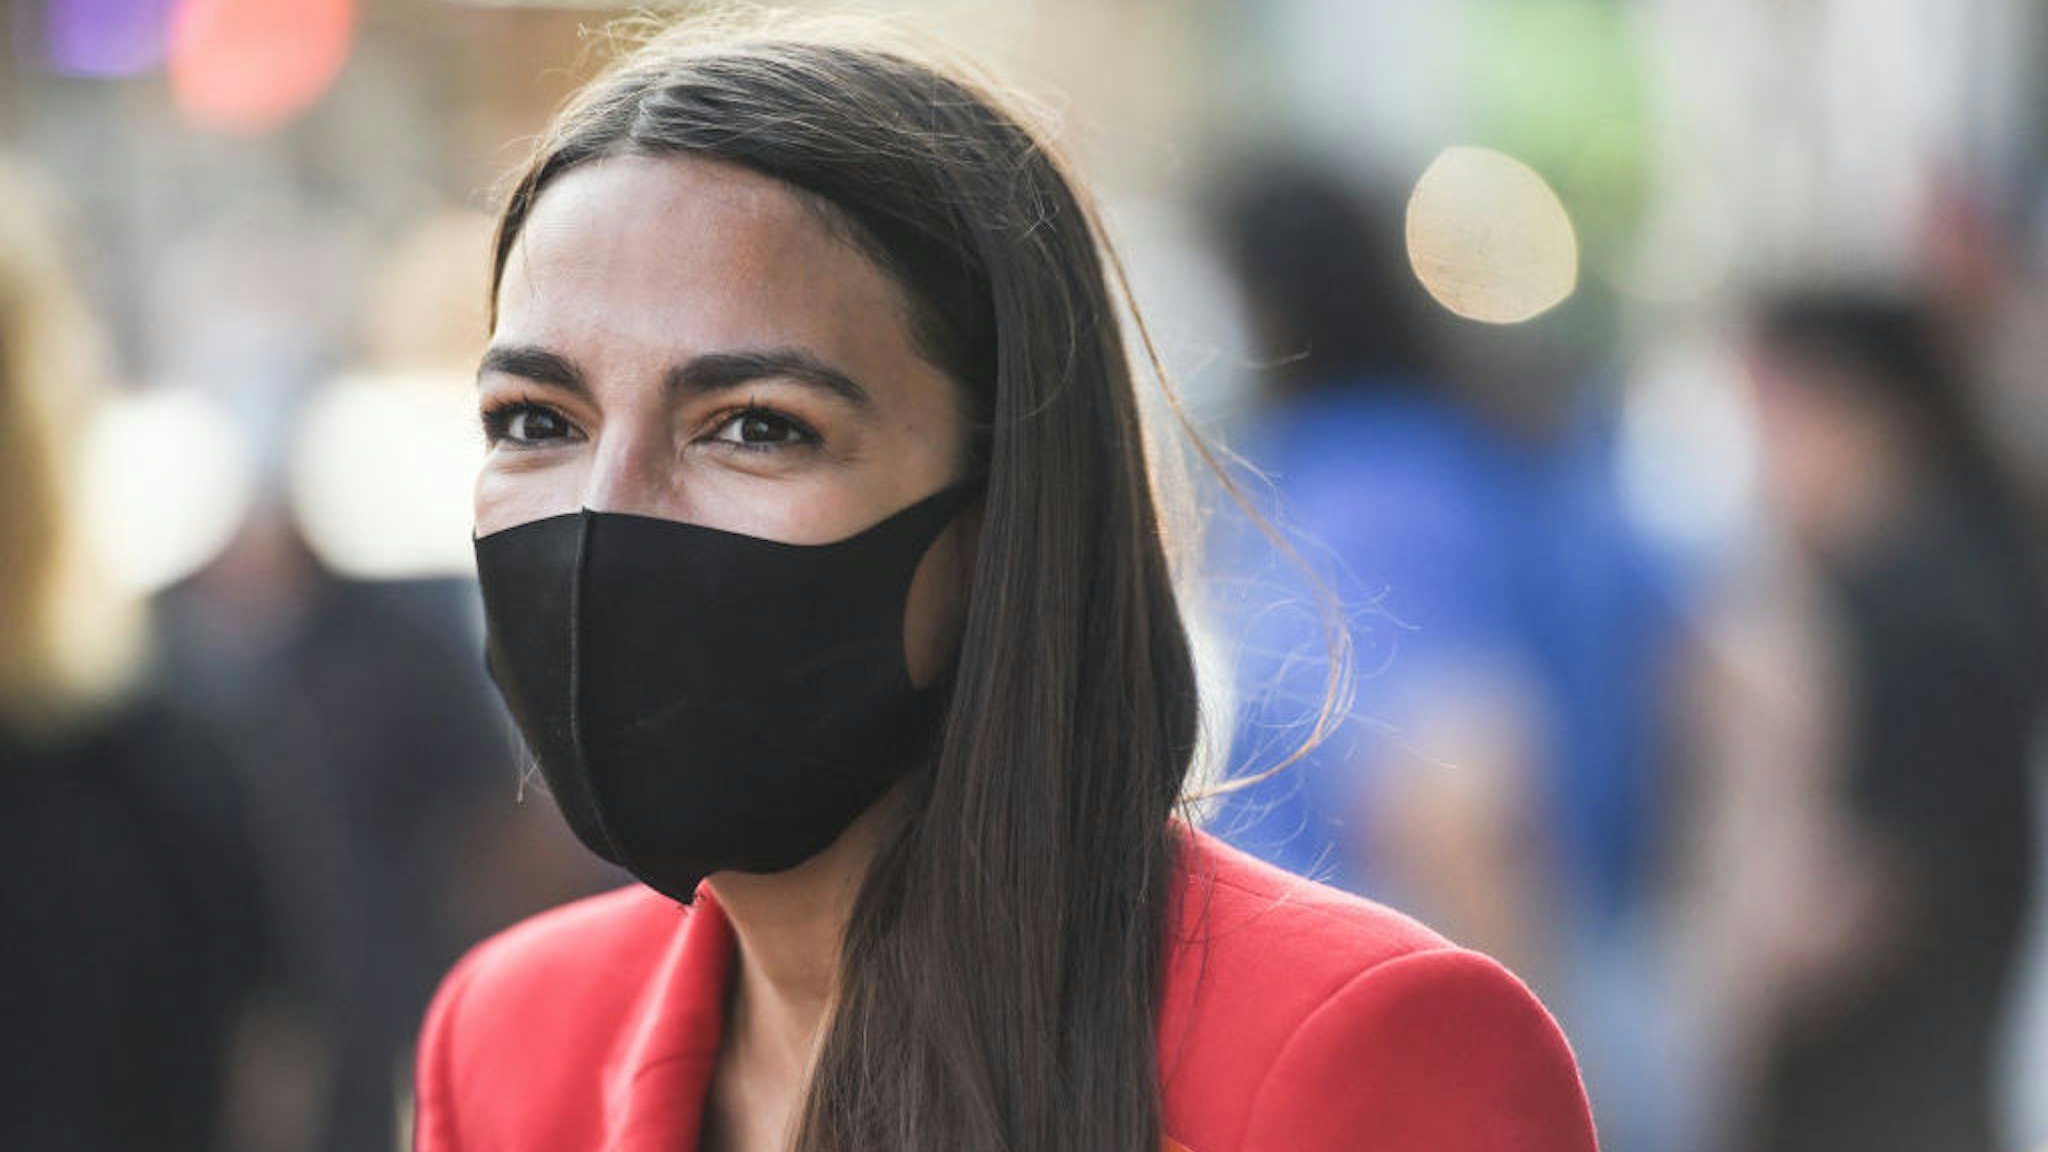 NEW YORK, NY - JUNE 23: Rep. Alexandria Ocasio-Cortez (D-NY) campaigns on June 23, 2020 in the Bronx borough of New York City. Ocasio-Cortez is running for re-election in the 14th congressional district against Michelle Caruso-Cabrera, a former CNBC anchor. (Photo by Stephanie Keith/Getty Images)